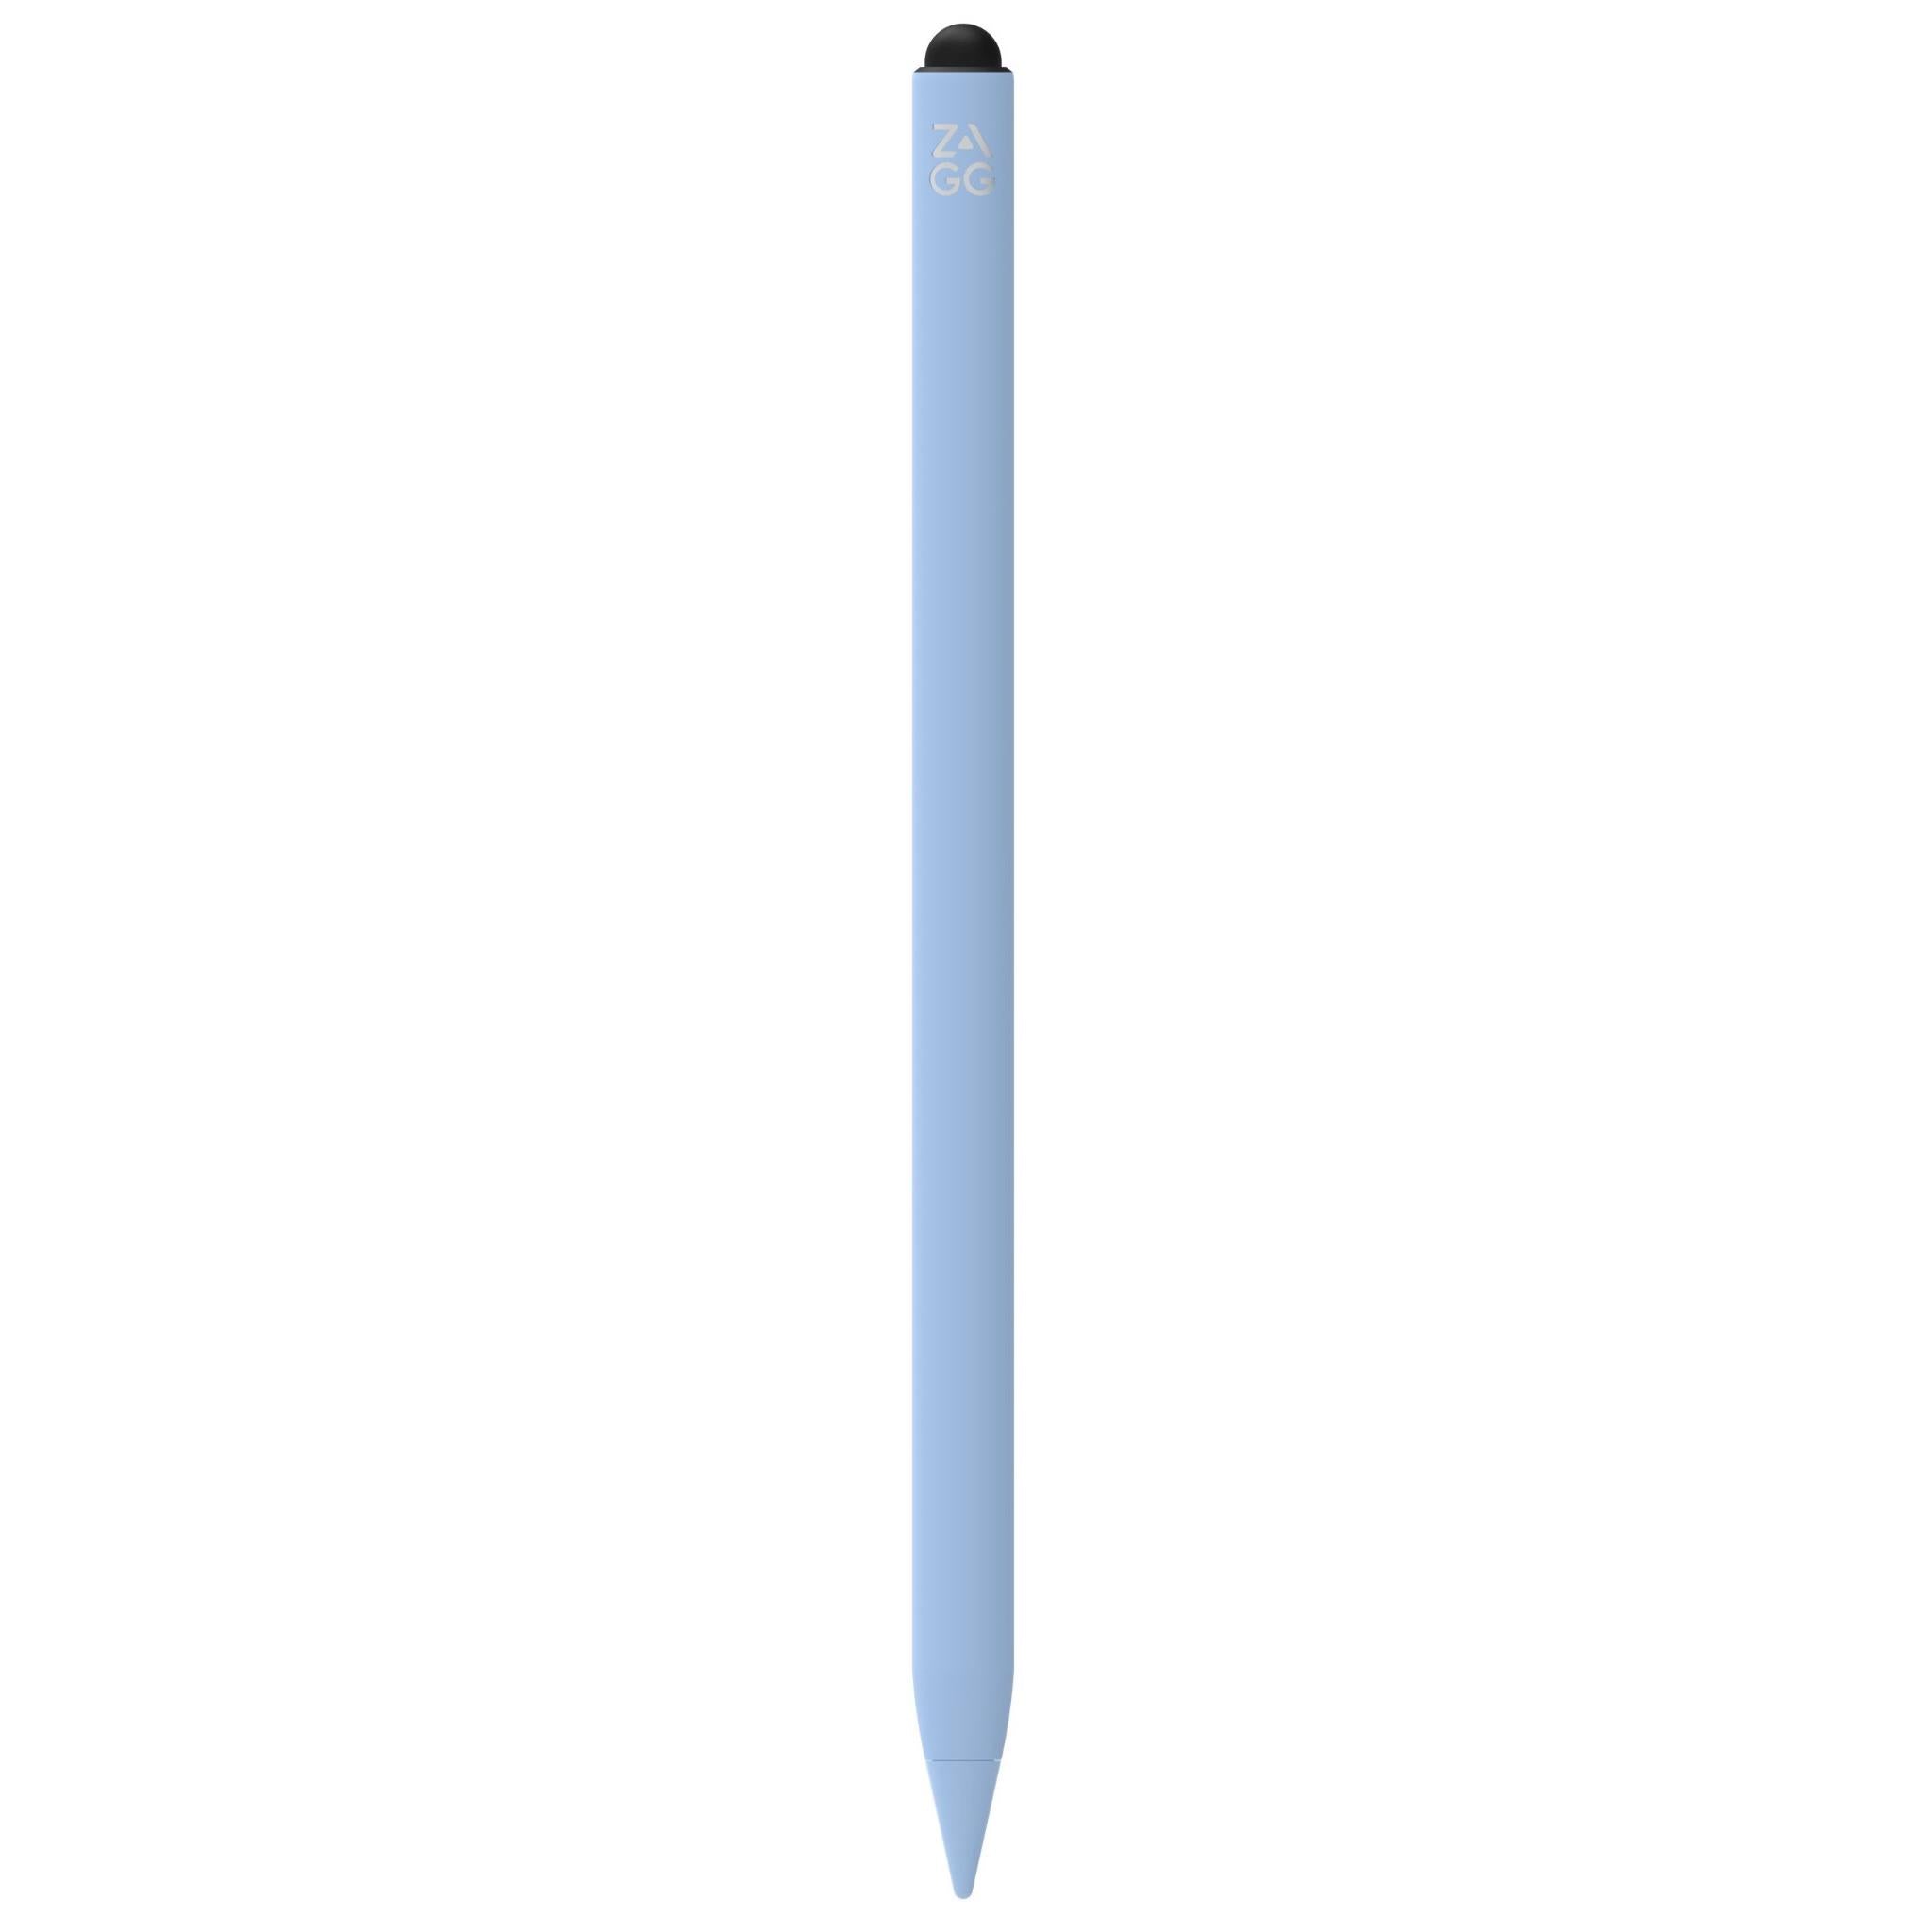 zagg pro stylus 2 pencil with wireless charging adapter (blue)